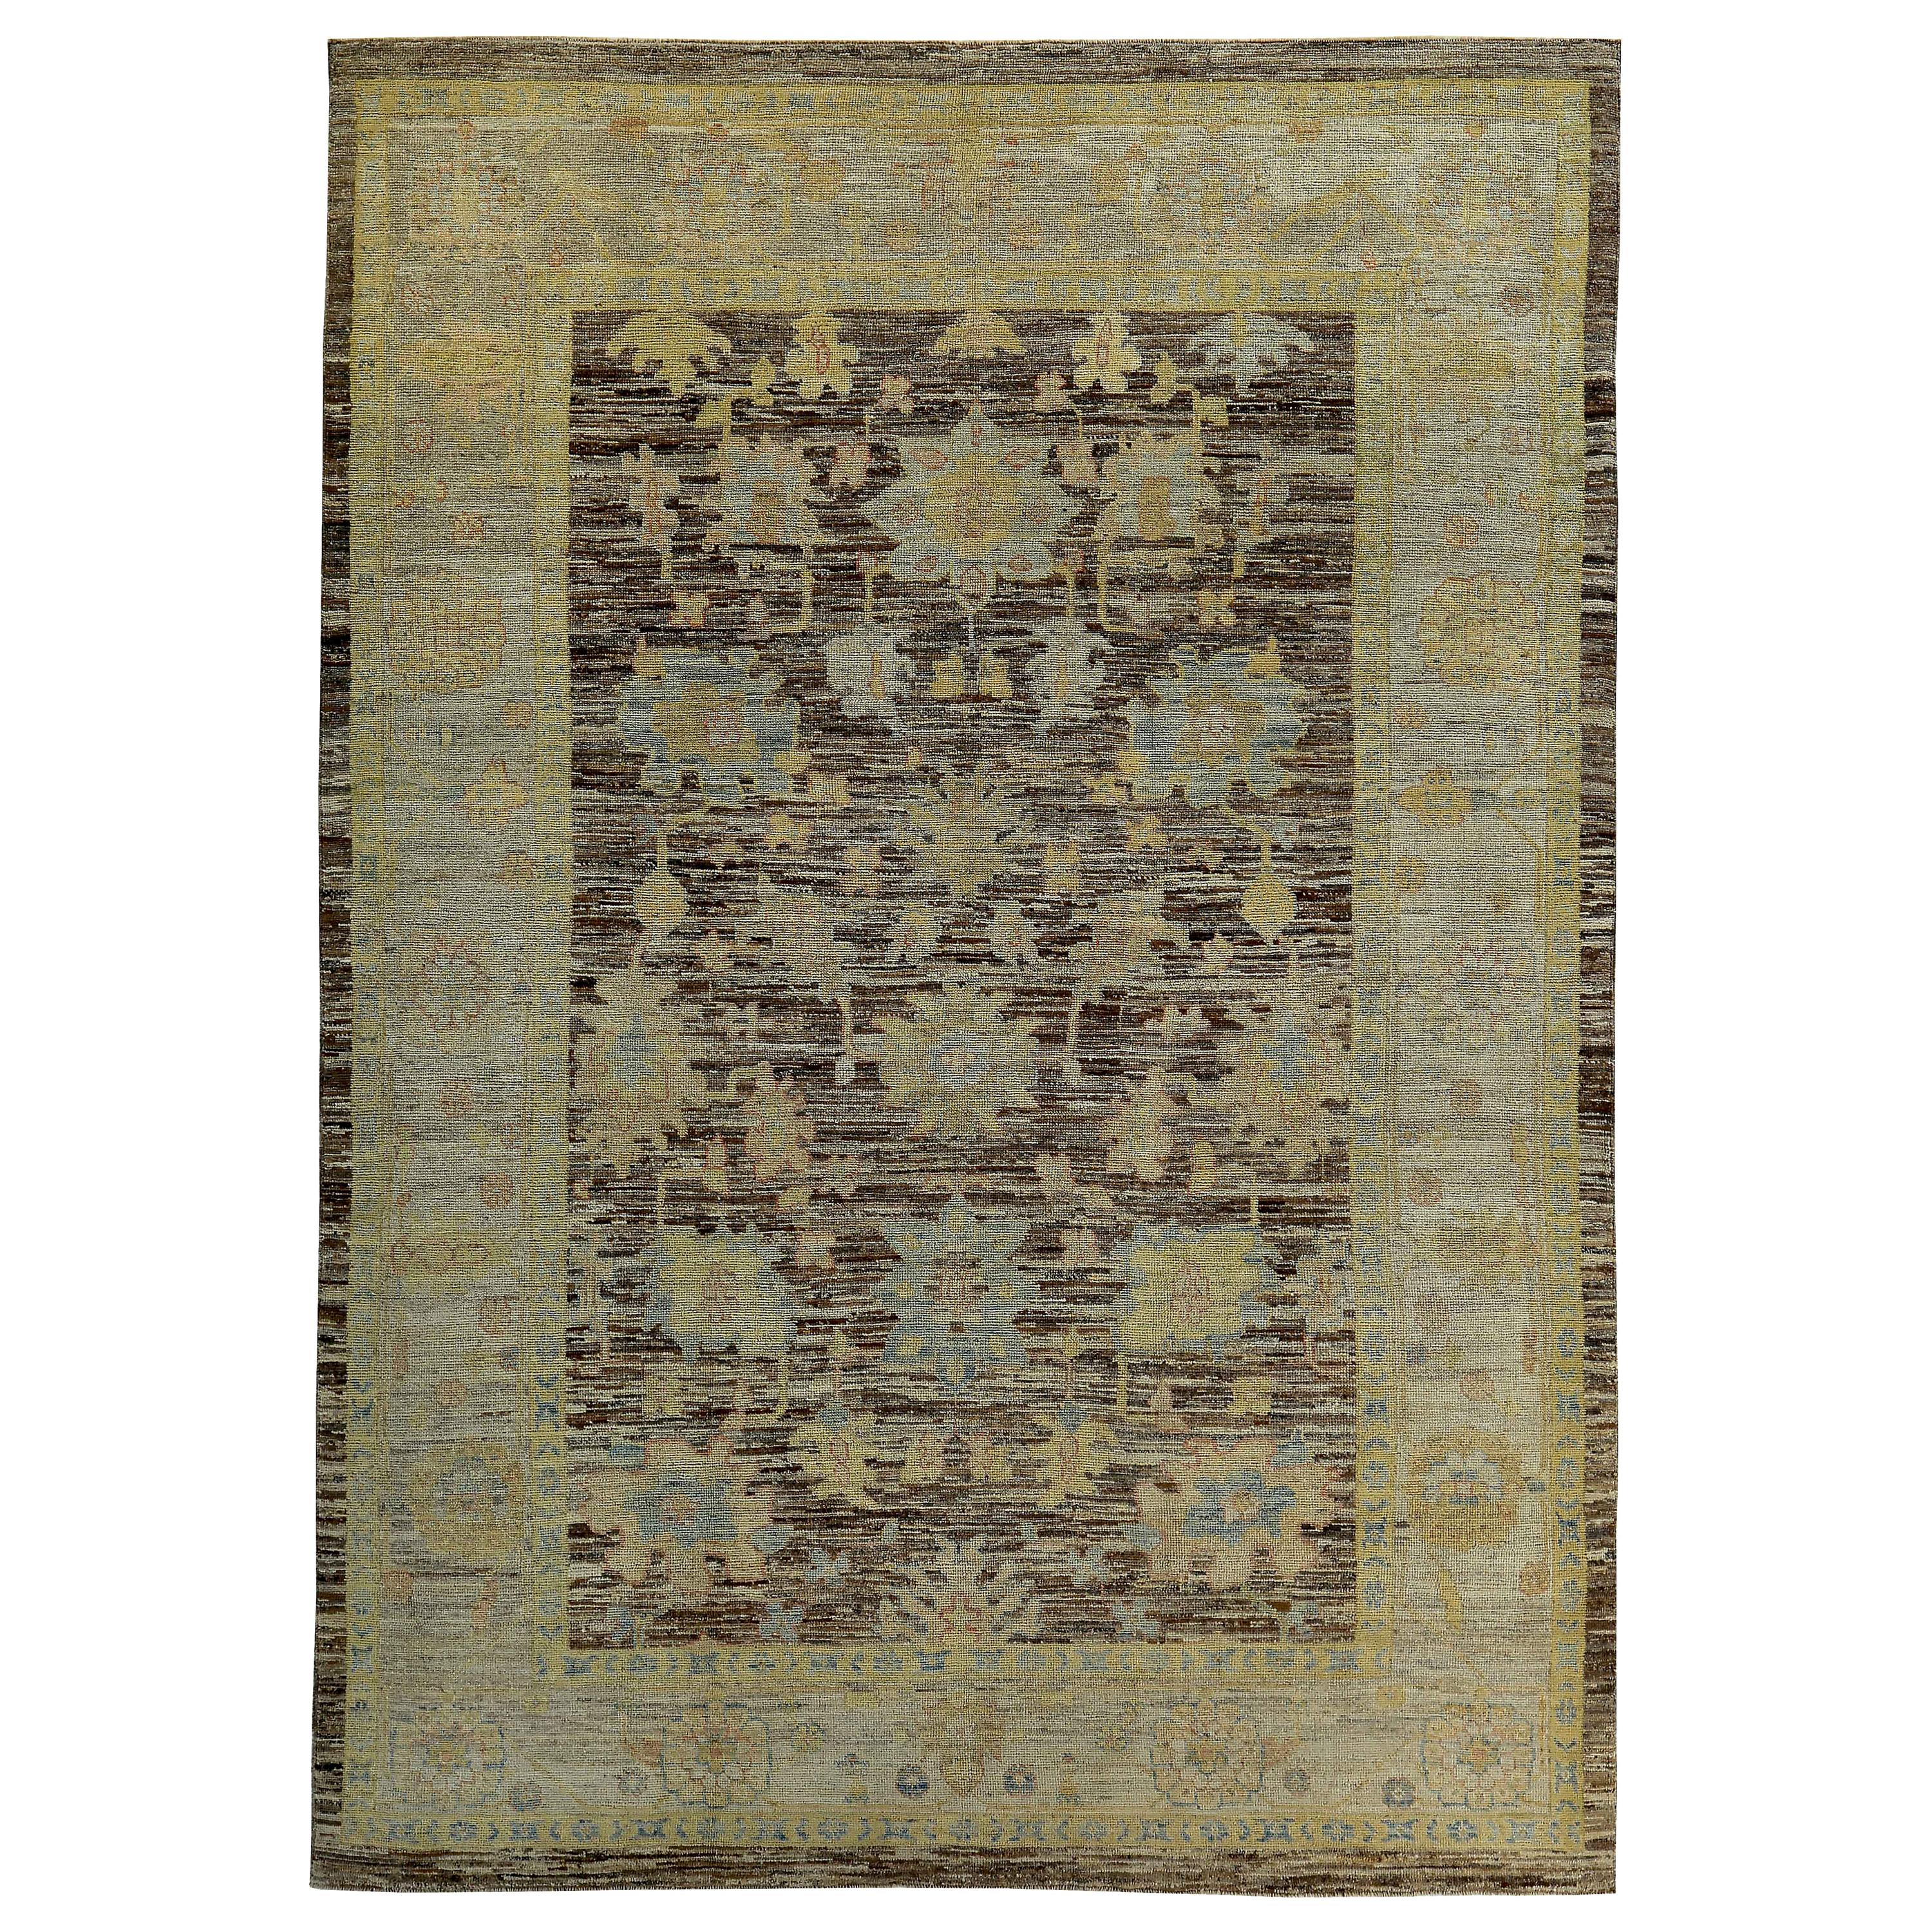 Contemporary Turkish Oushak Rug in Brown with Ivory and Gold Floral Patterns